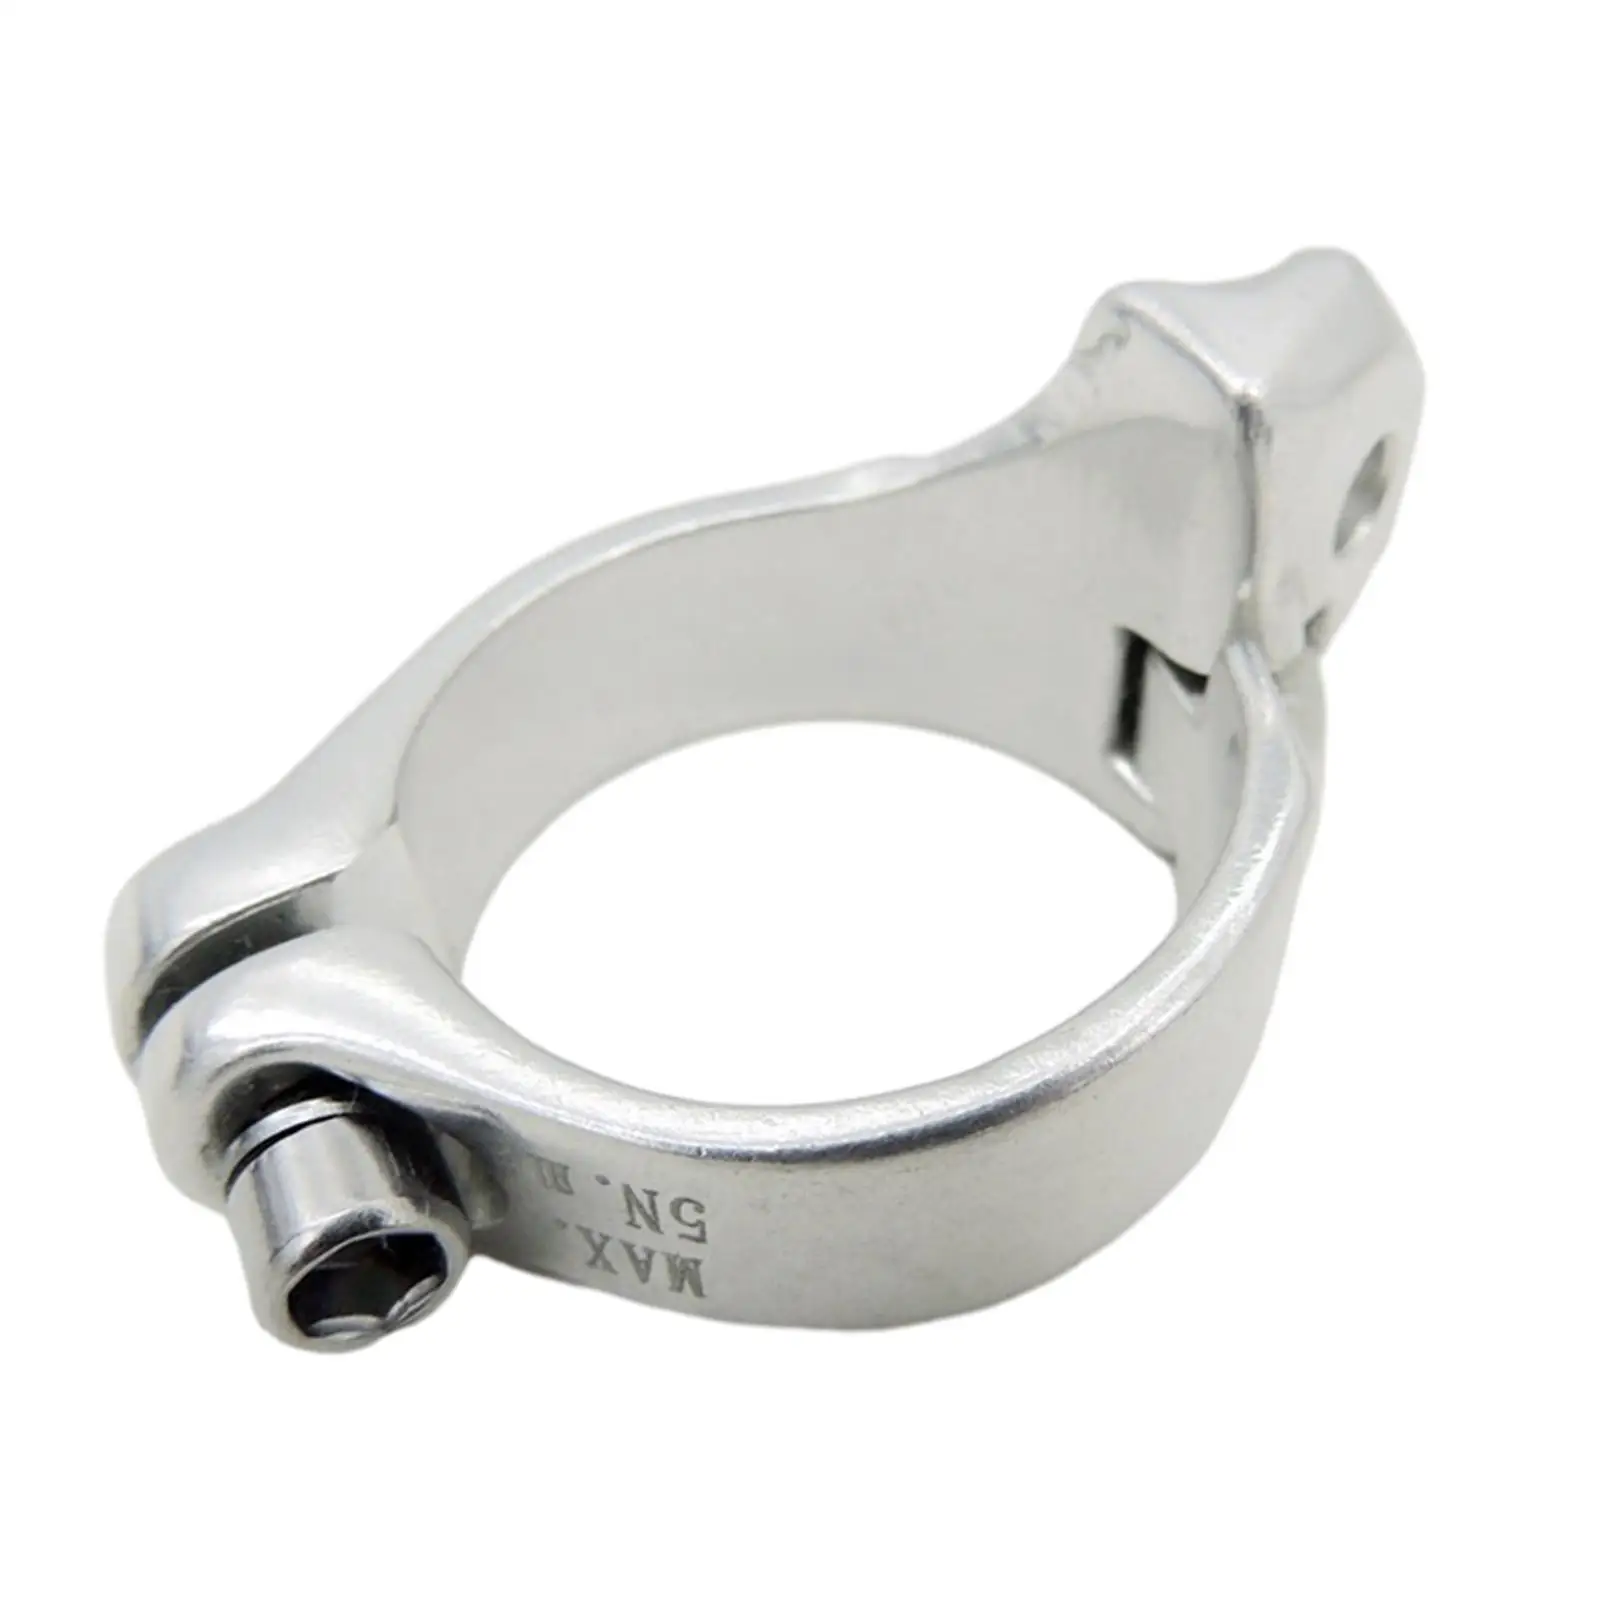 Bike Derailleur Clamp 34.9mm Bicycle Front Derailleur Clamp Adapter